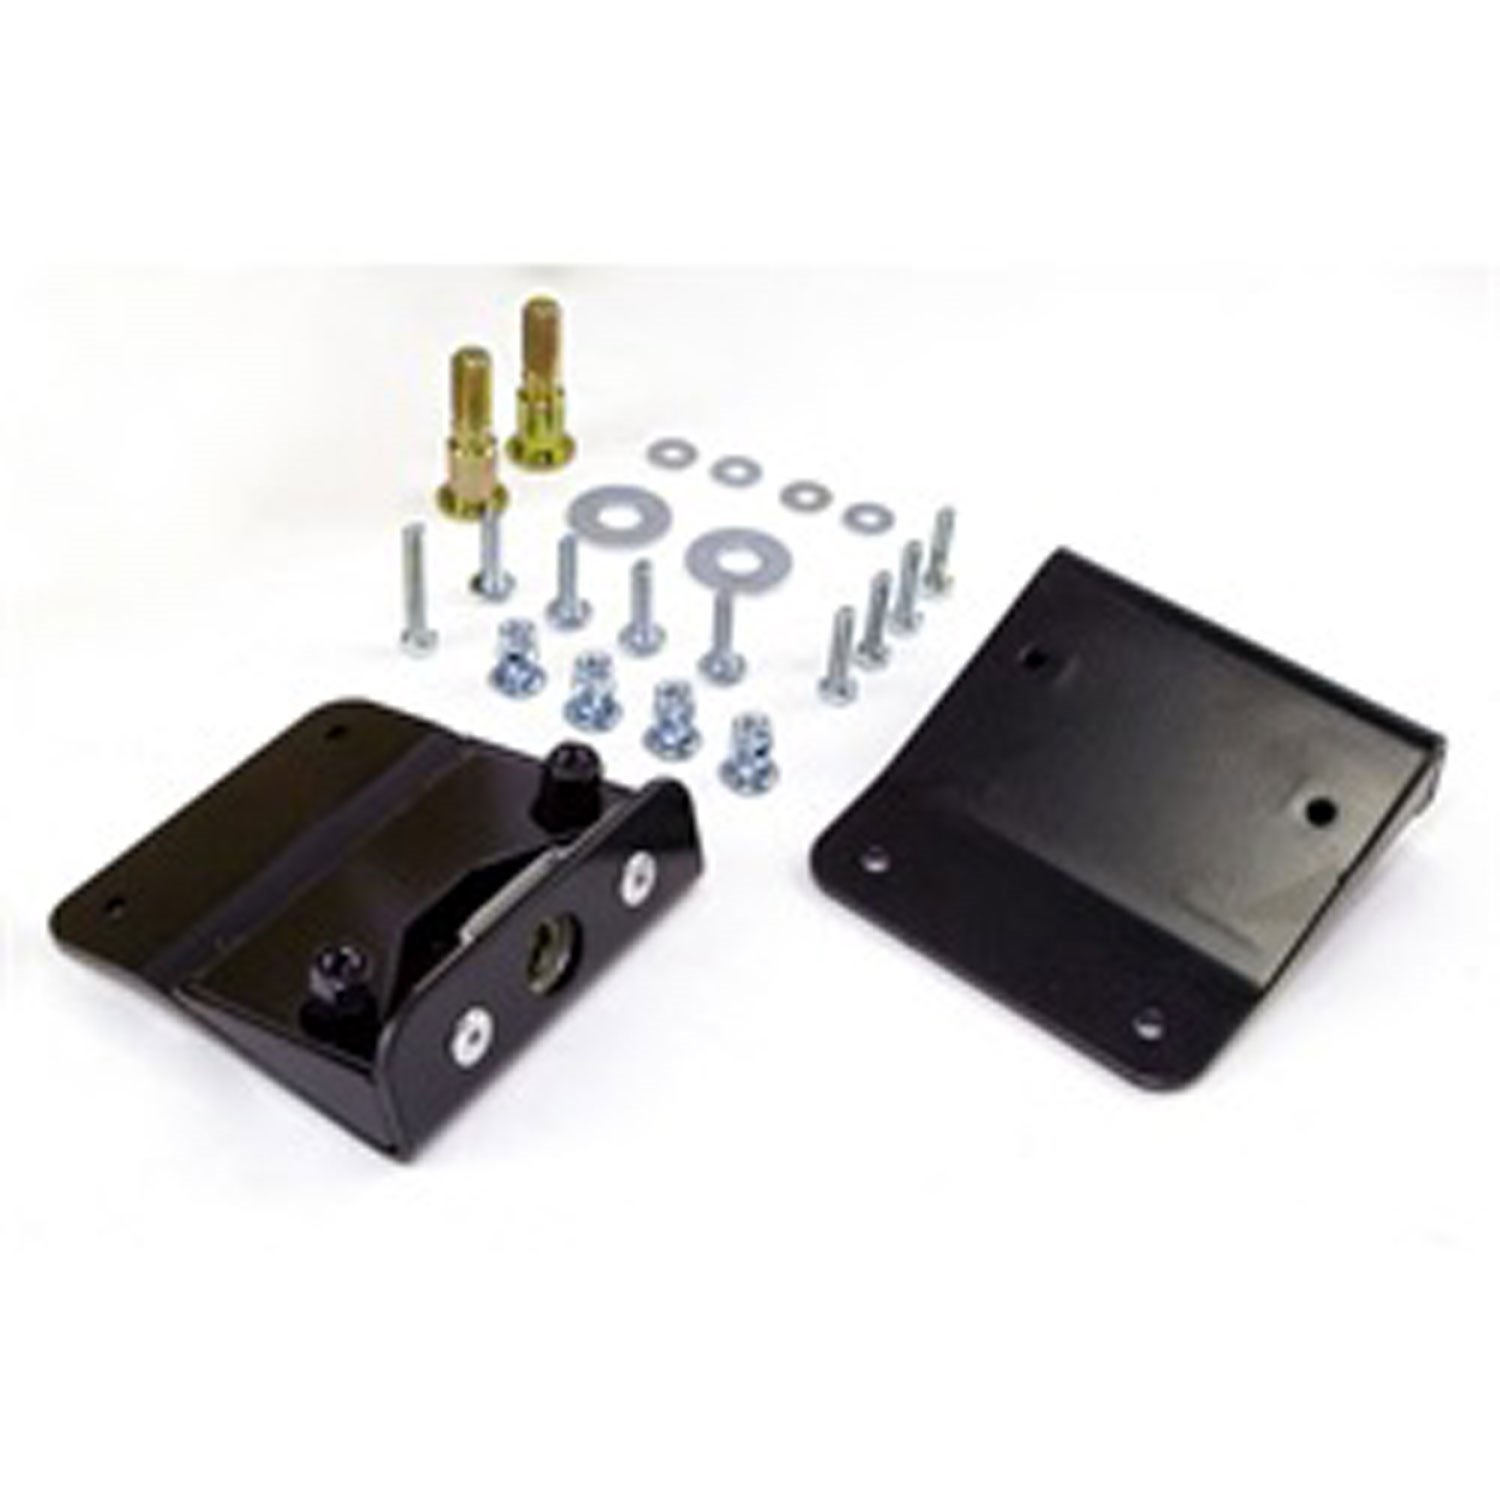 Door Latch Mounting Bracket For use with Hardtop doors/rotary latch style soft doors or Fiberglass B